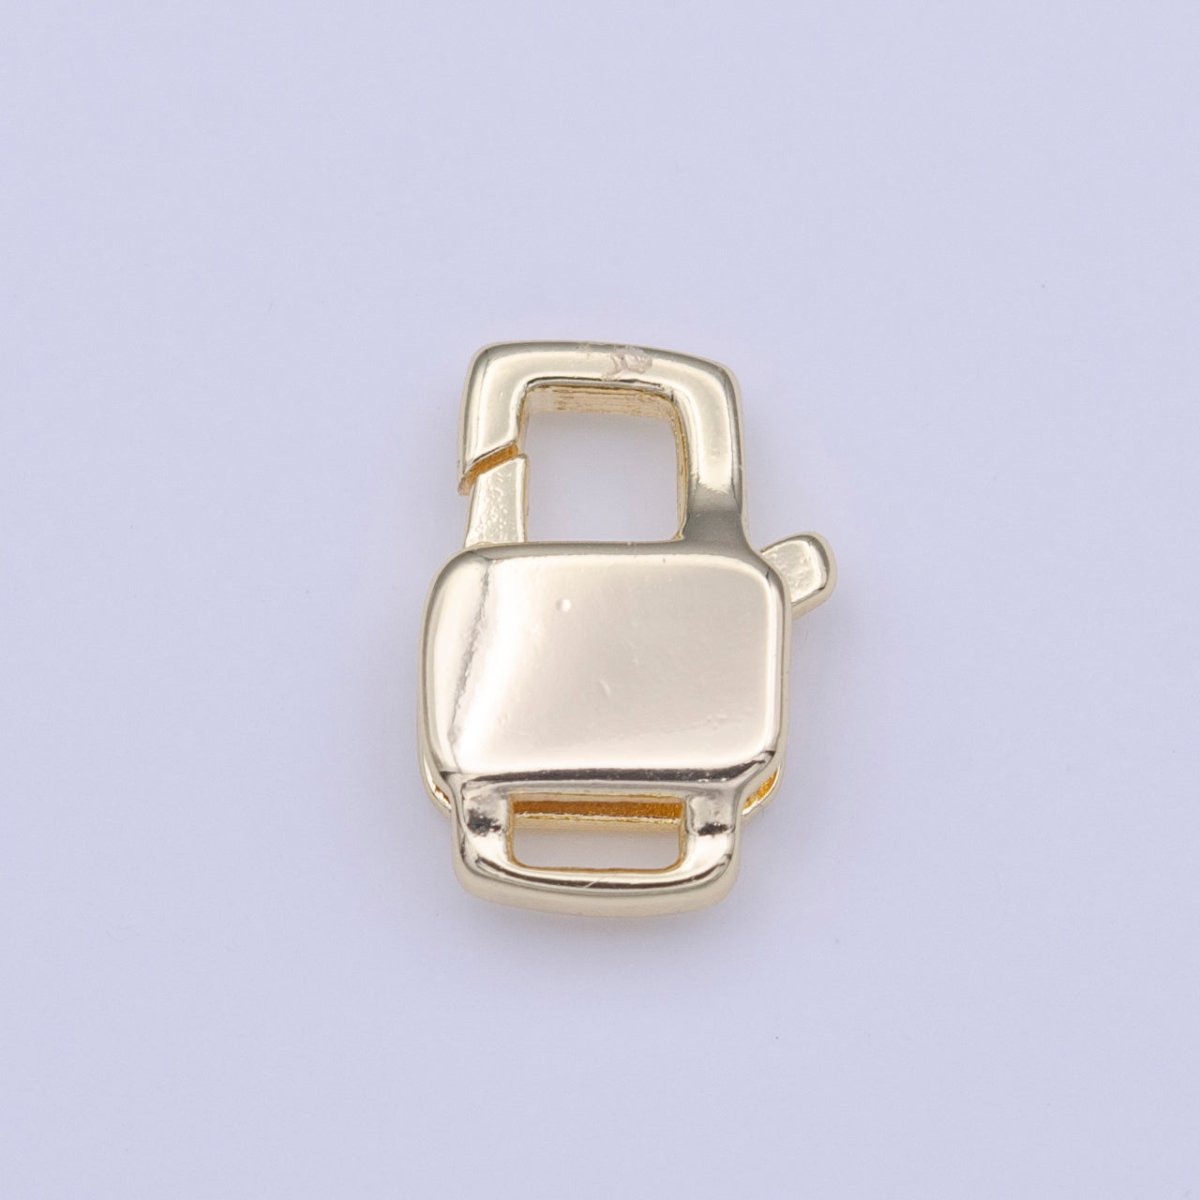 12mm Double Sided Boxy Rectangular Lobster Clasps Jewelry Closure in Gold & Silver | K-261 K-267 - DLUXCA